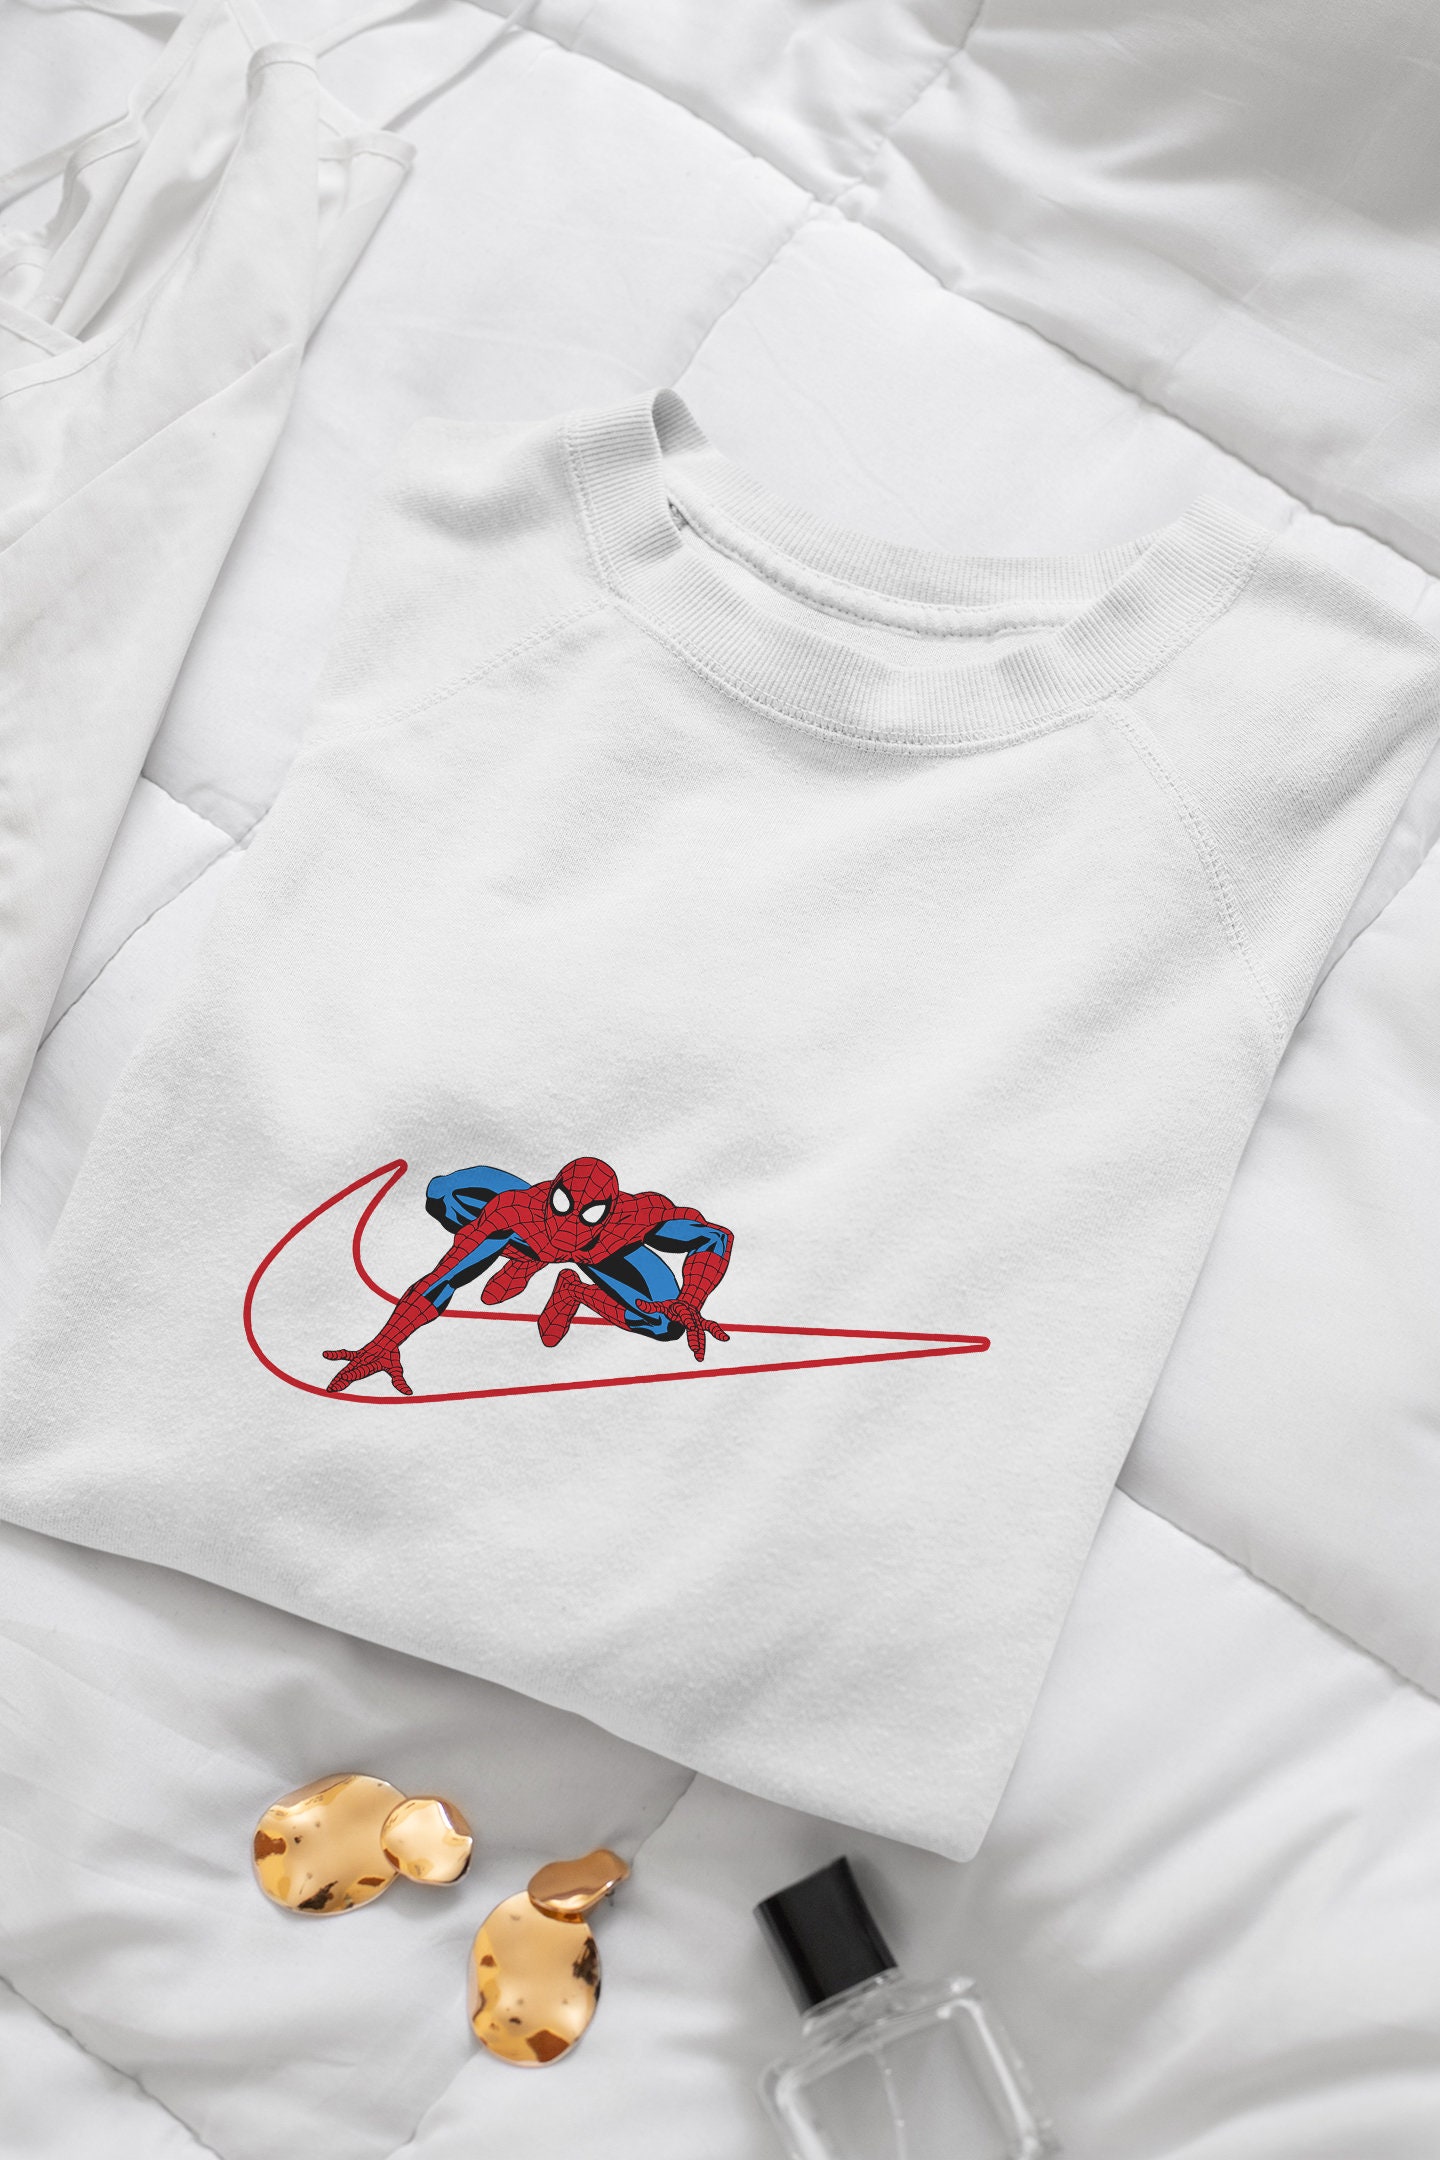 Spiderman No Way Home Nike Sweater - Teeholly